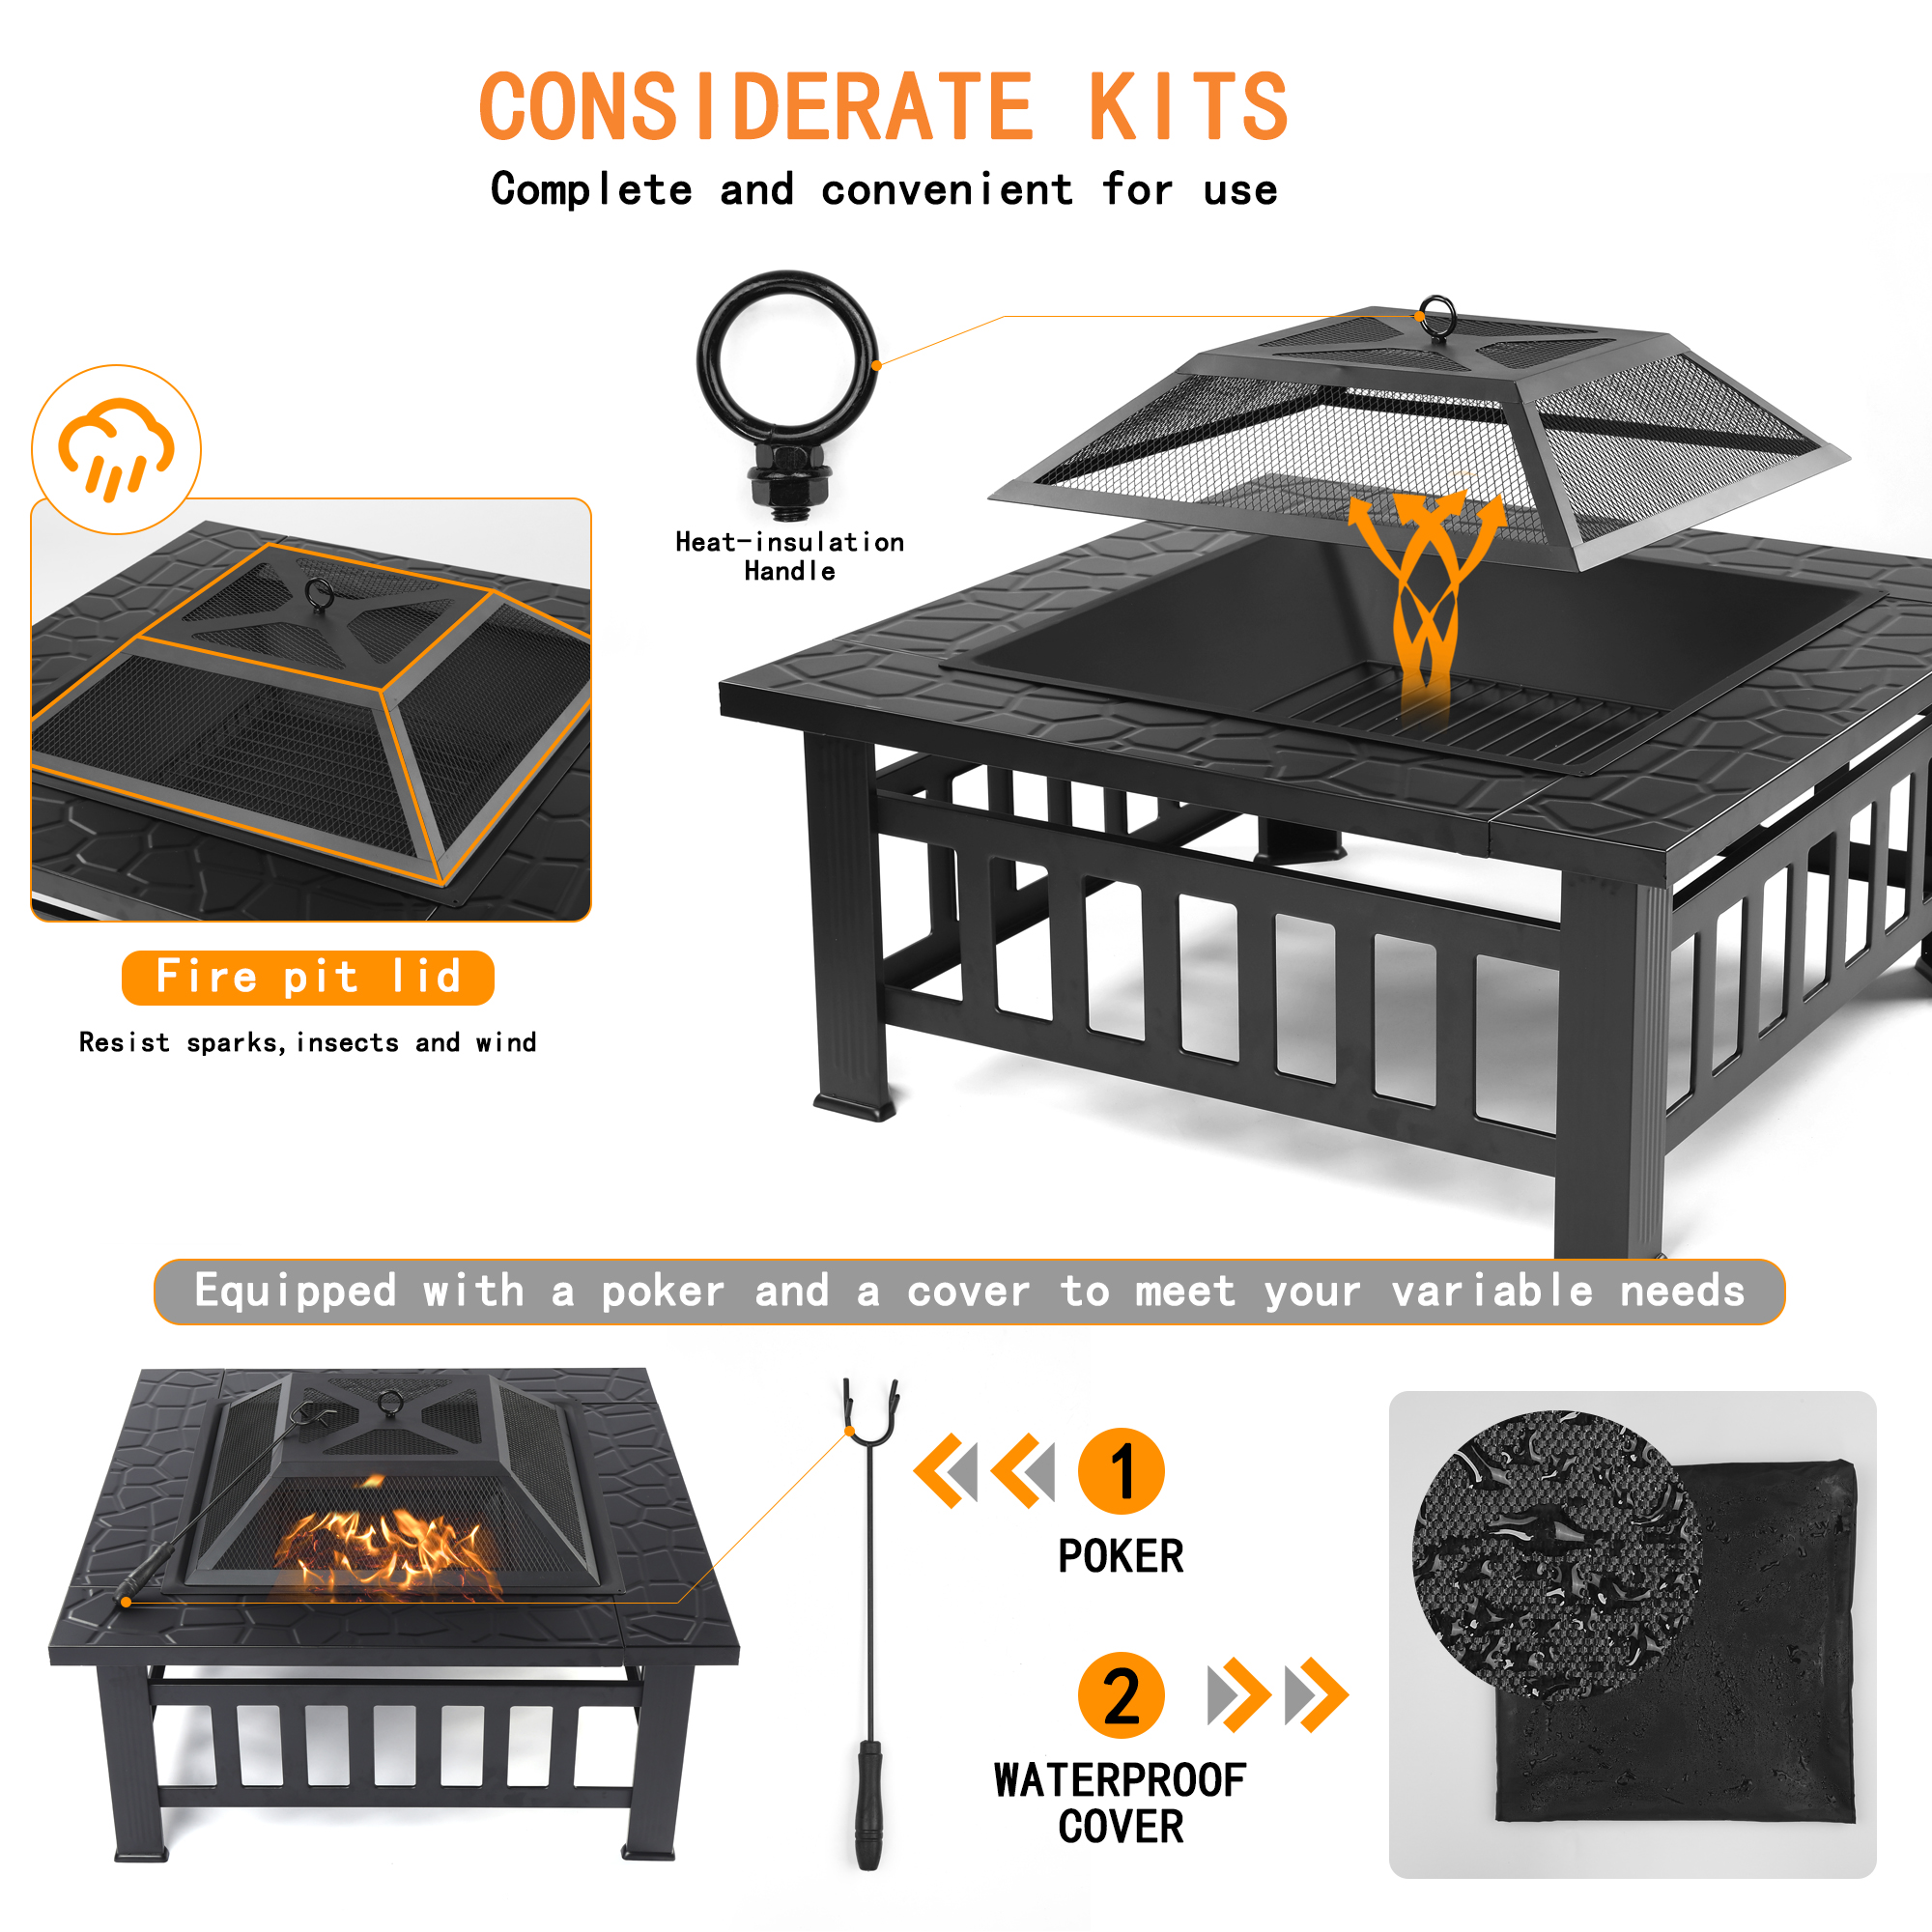 Fire Pits for Outside, 32" Wood Burning Fire Pit Tables with Screen Lid, Poker, BBQ Net, Ice Tray, Food Clip and Cover, Backyard Patio Garden Outdoor Fire Pit/Ice Pit/BBQ Fire Pit, Black - image 3 of 10